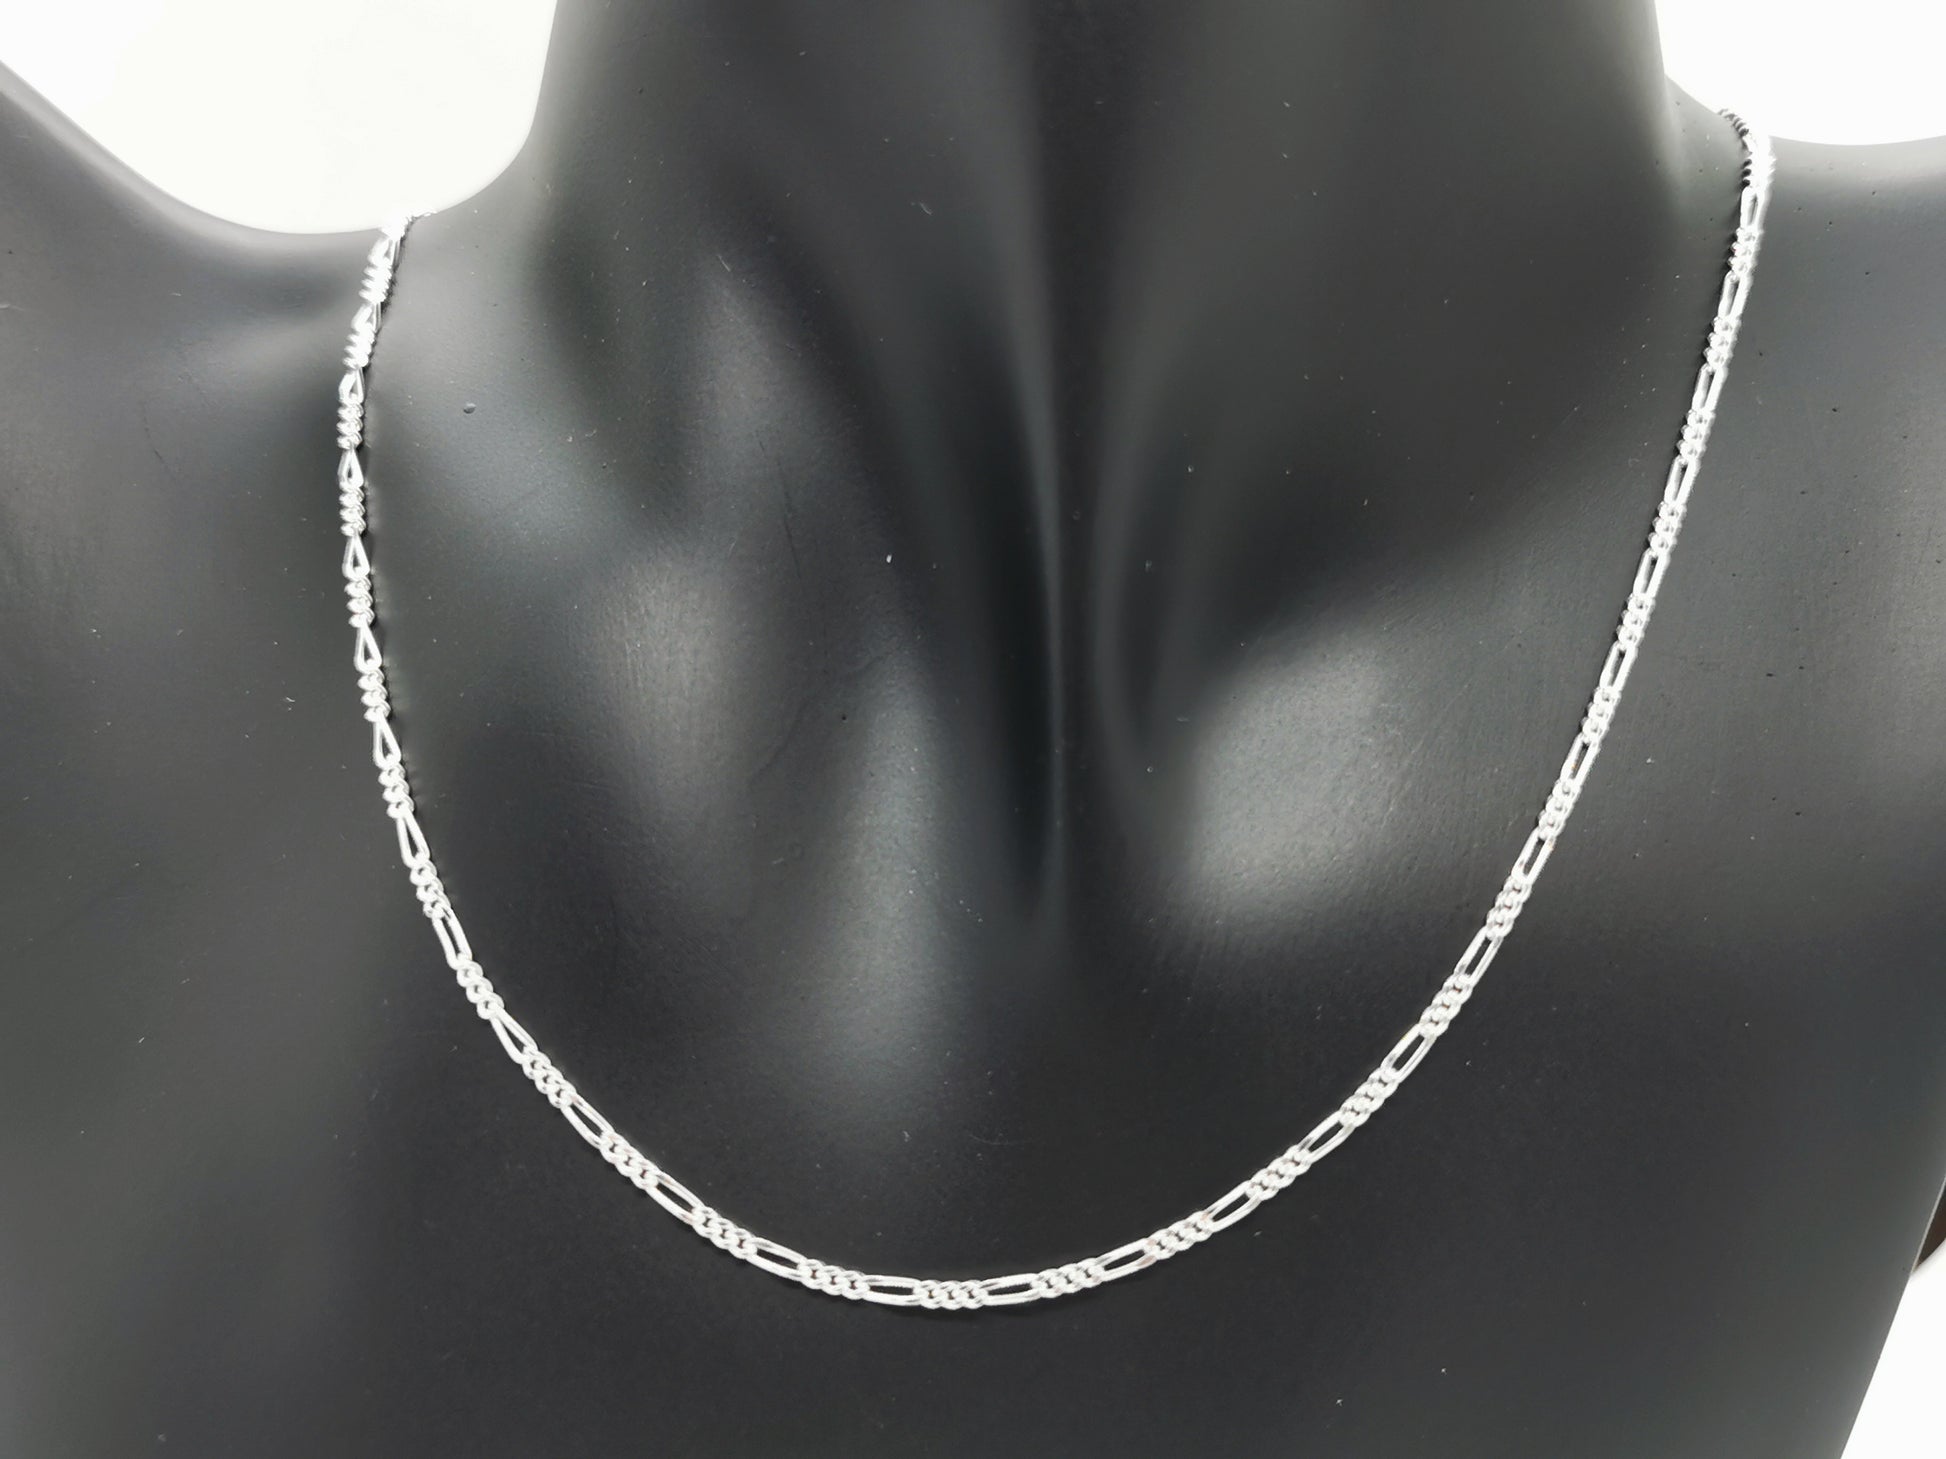 Sterling silver figgaro chain made to order, 1.8mm jewelry chain, 1.8mm links chain, 1.8mm jewellery chain, 1.8mm chain necklace, 1.8mm chain necklace in silver, necklace chains, silver necklace chains, big link chains, sterling silver chain necklace, sterling silver chain, silver 1.8mm chain, silver chain jewelry, silver chain jewellery, chain for pendant in silver